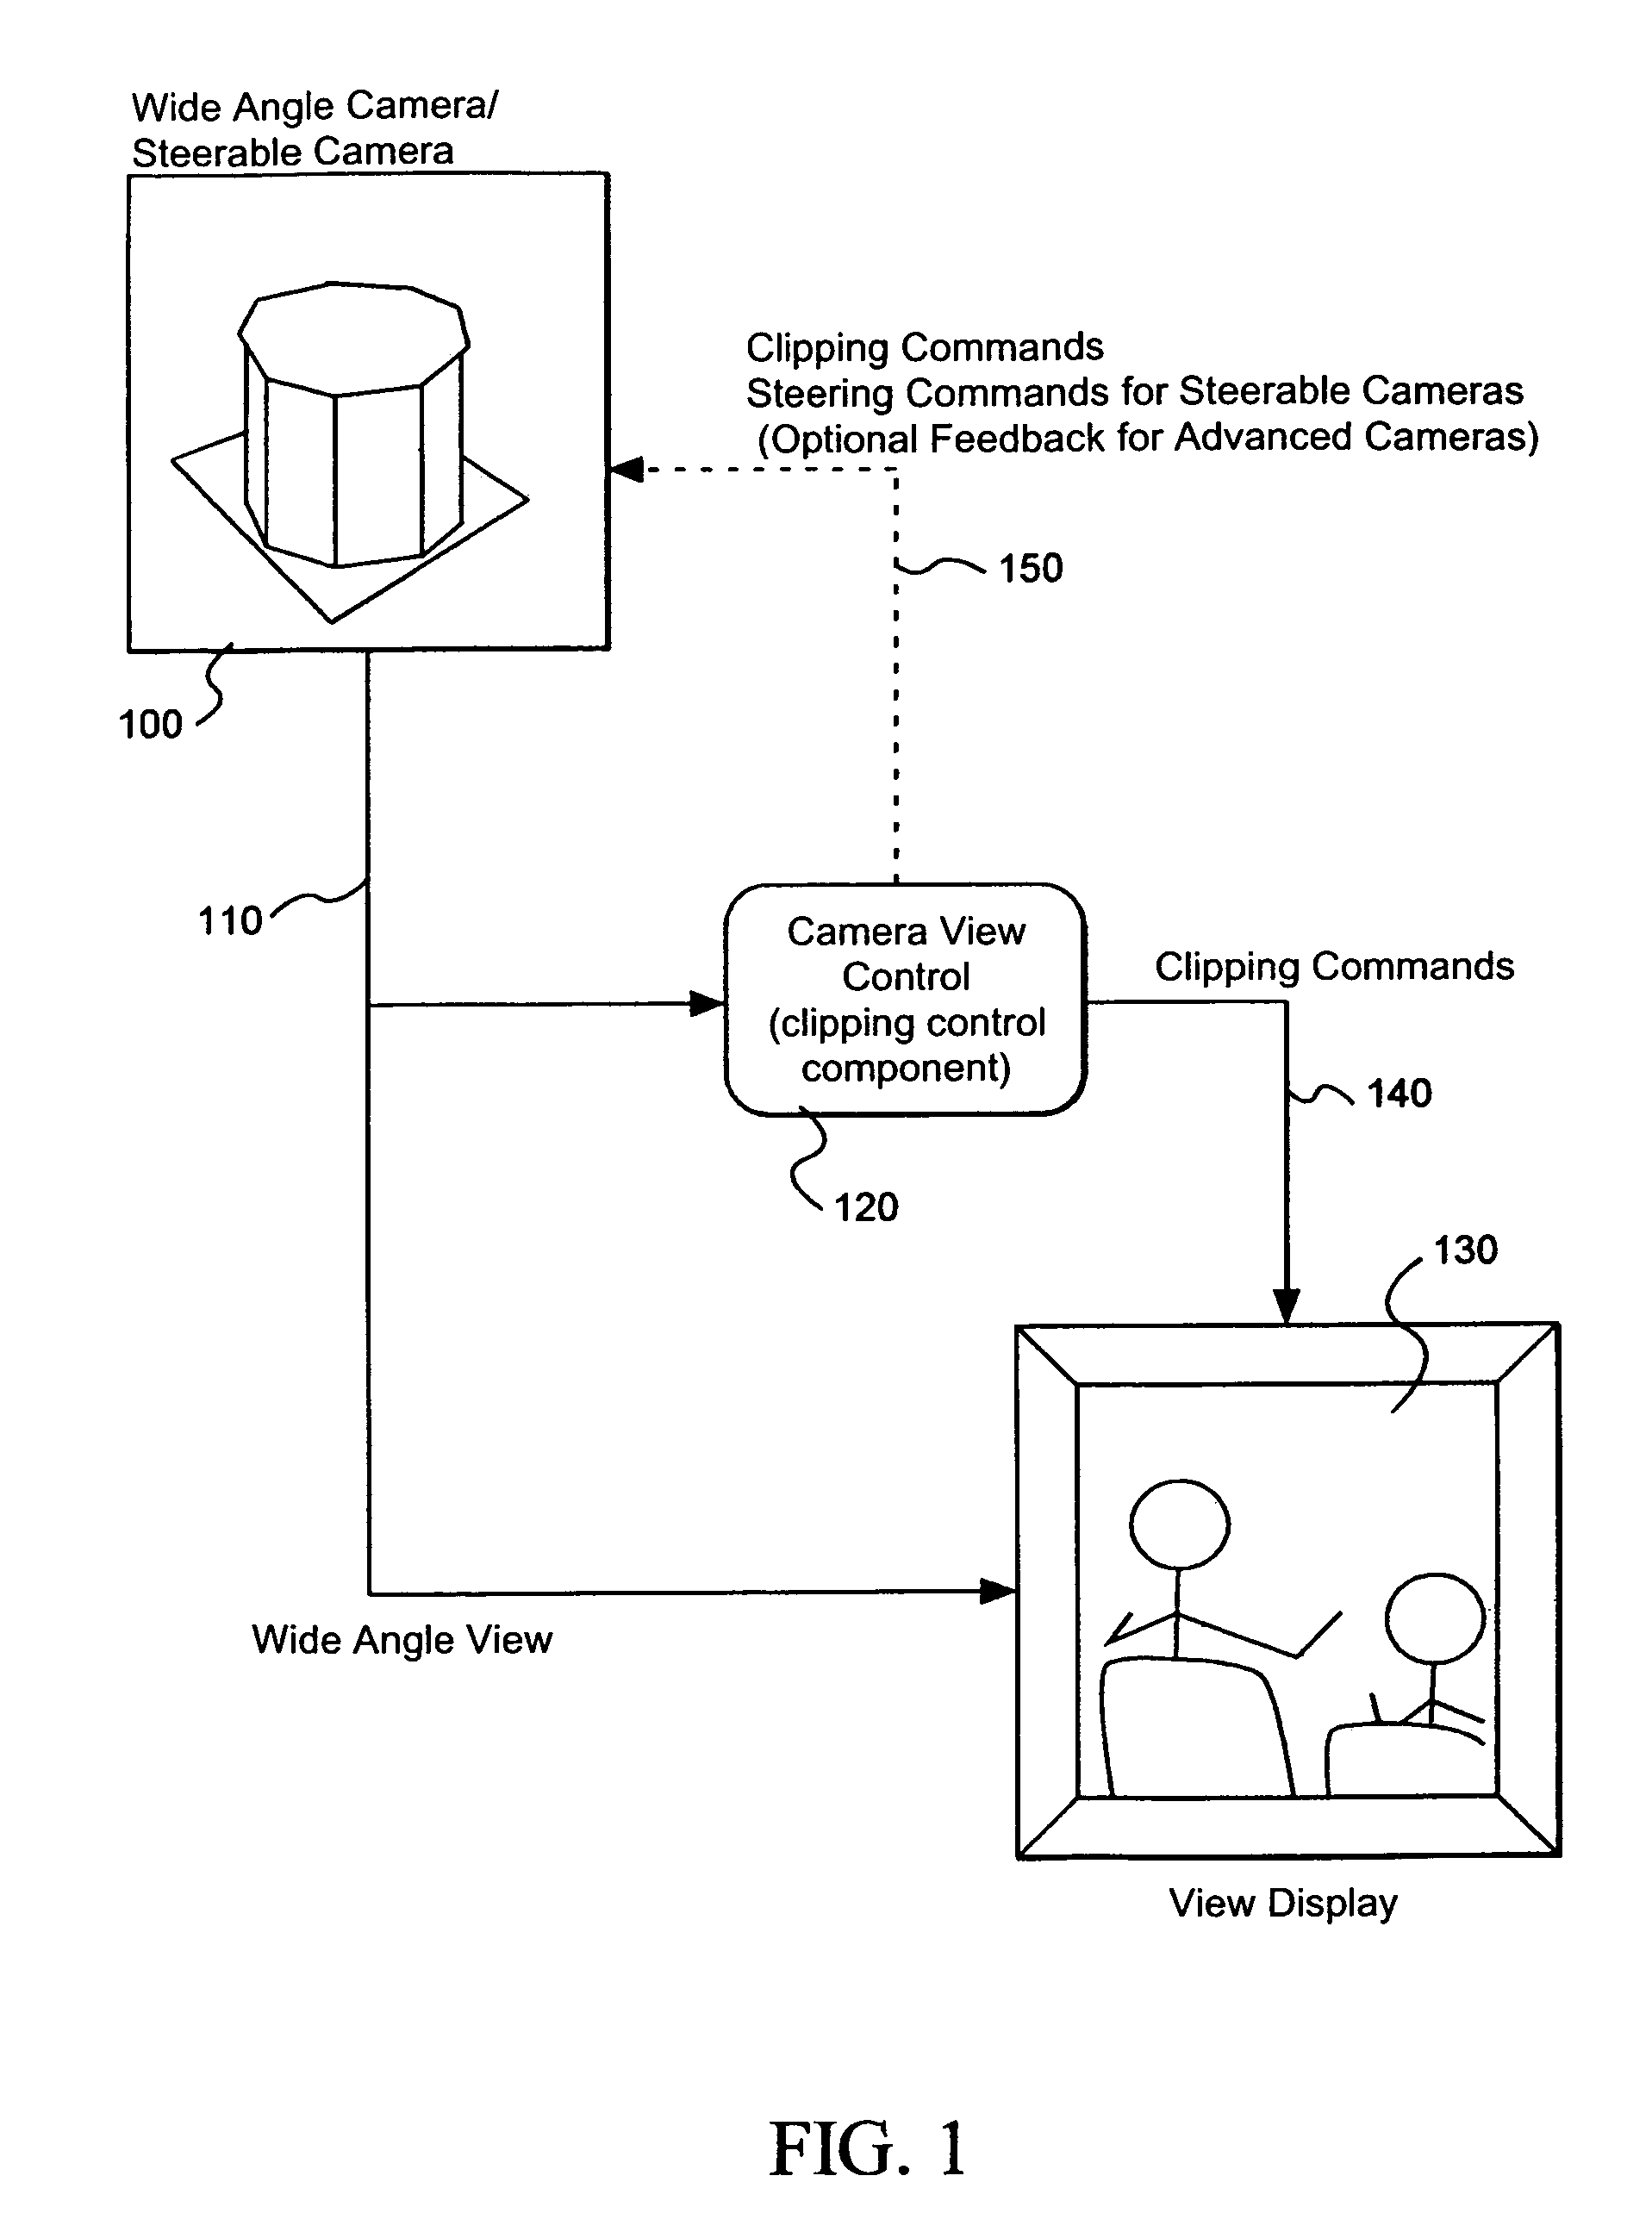 System for controlling video and motion picture cameras